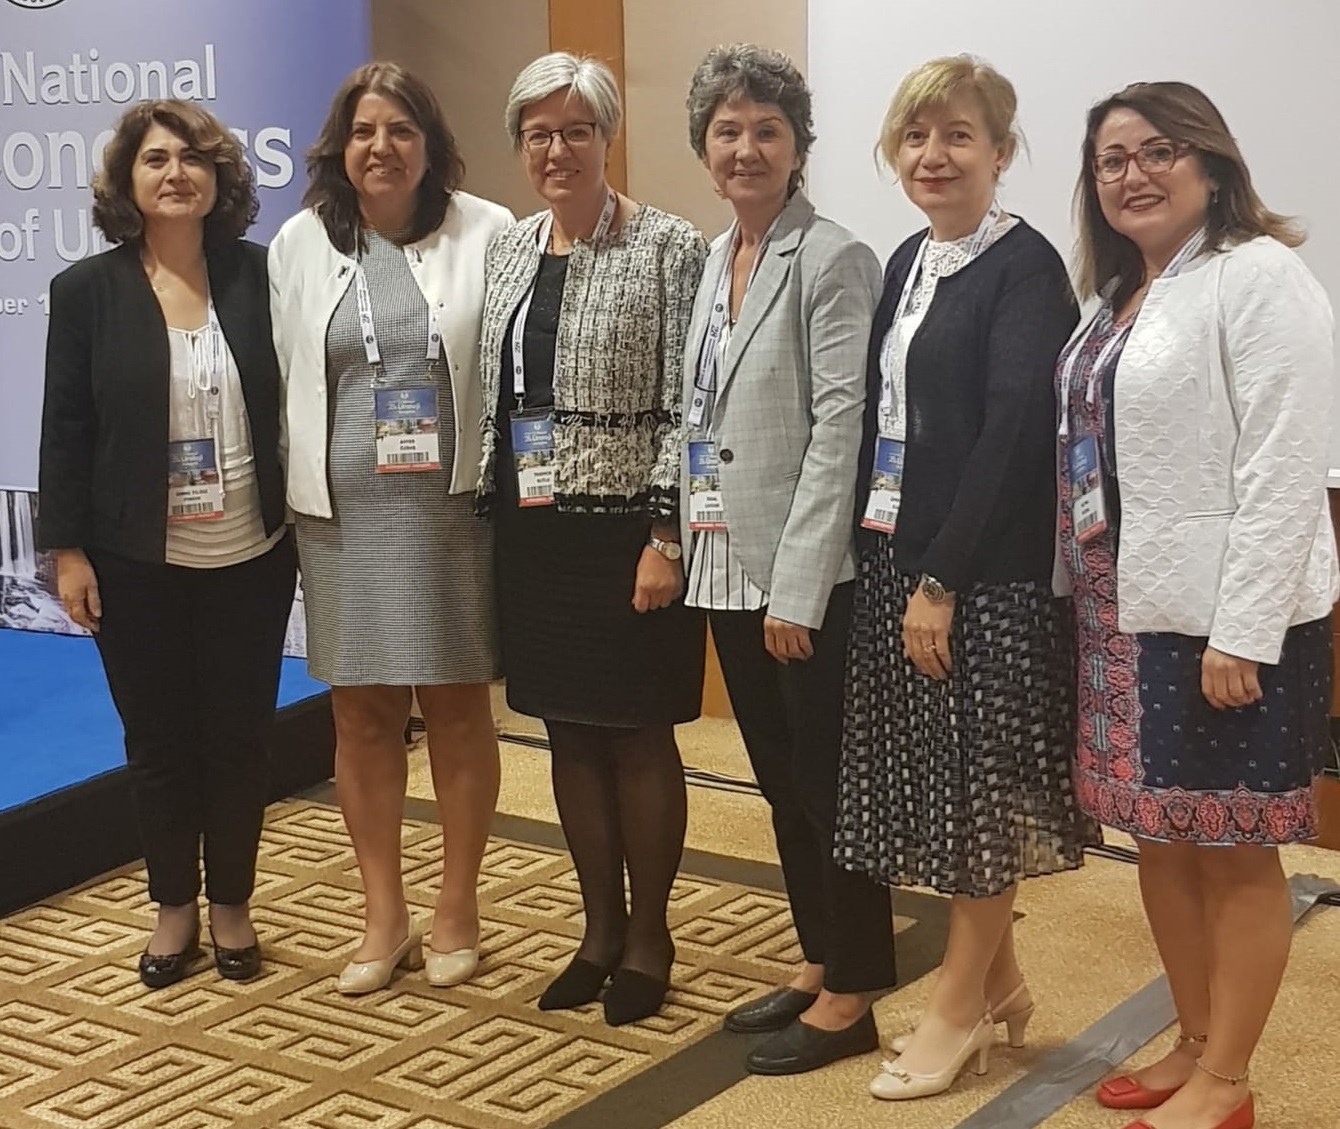 “Patient participance in health services” discussed at the Urological Nursing Congress